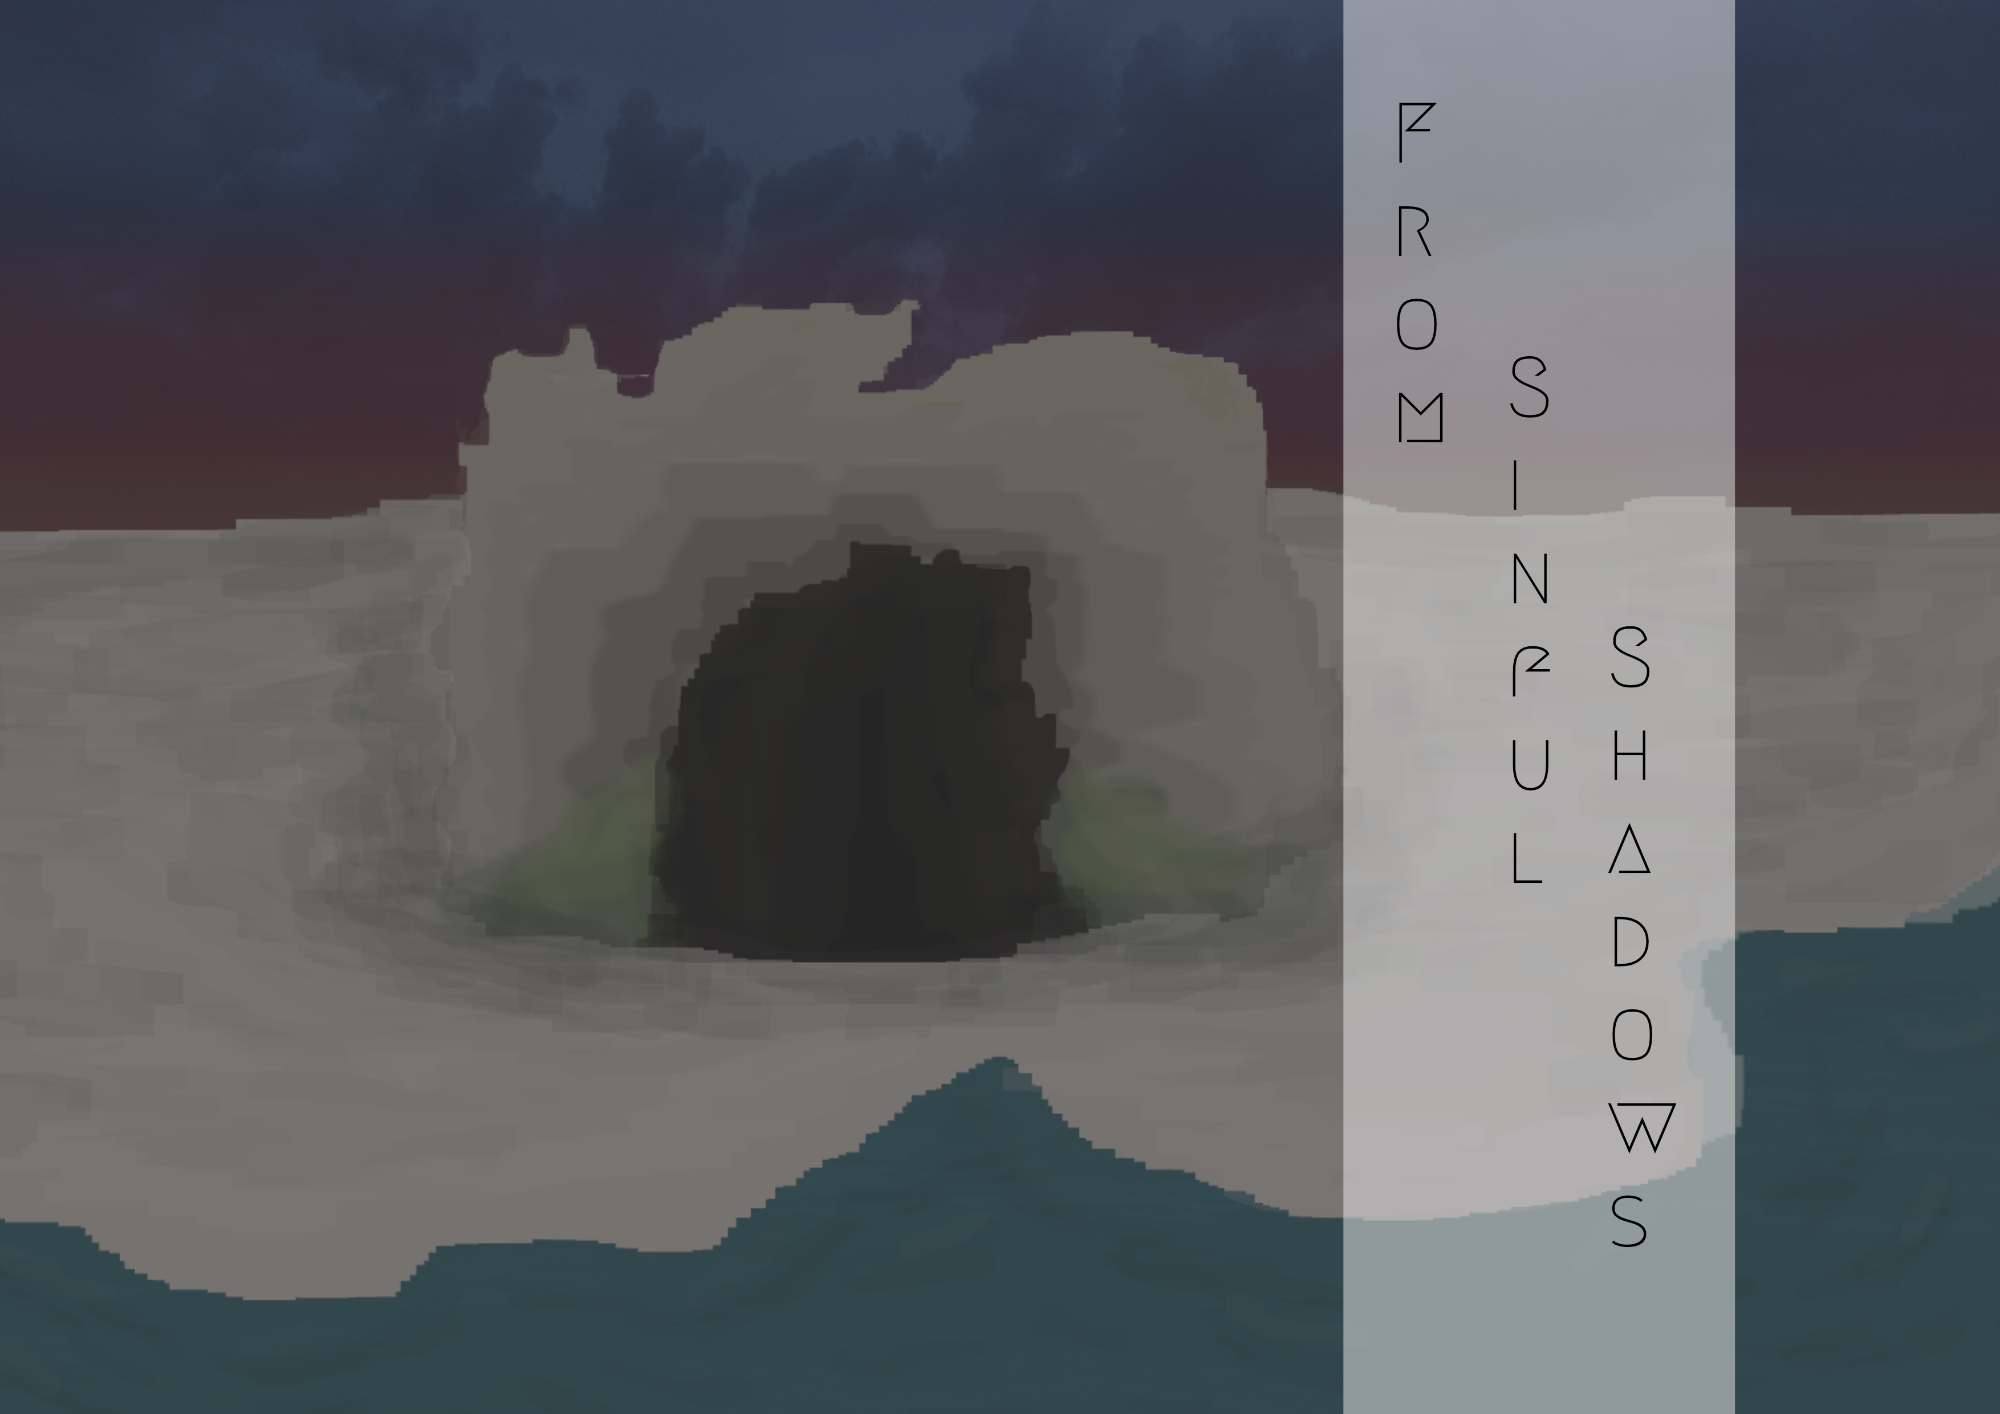 Digital art of a blocky cave with moss growing at the bottom on an barren island with a sunset background. The title along the side